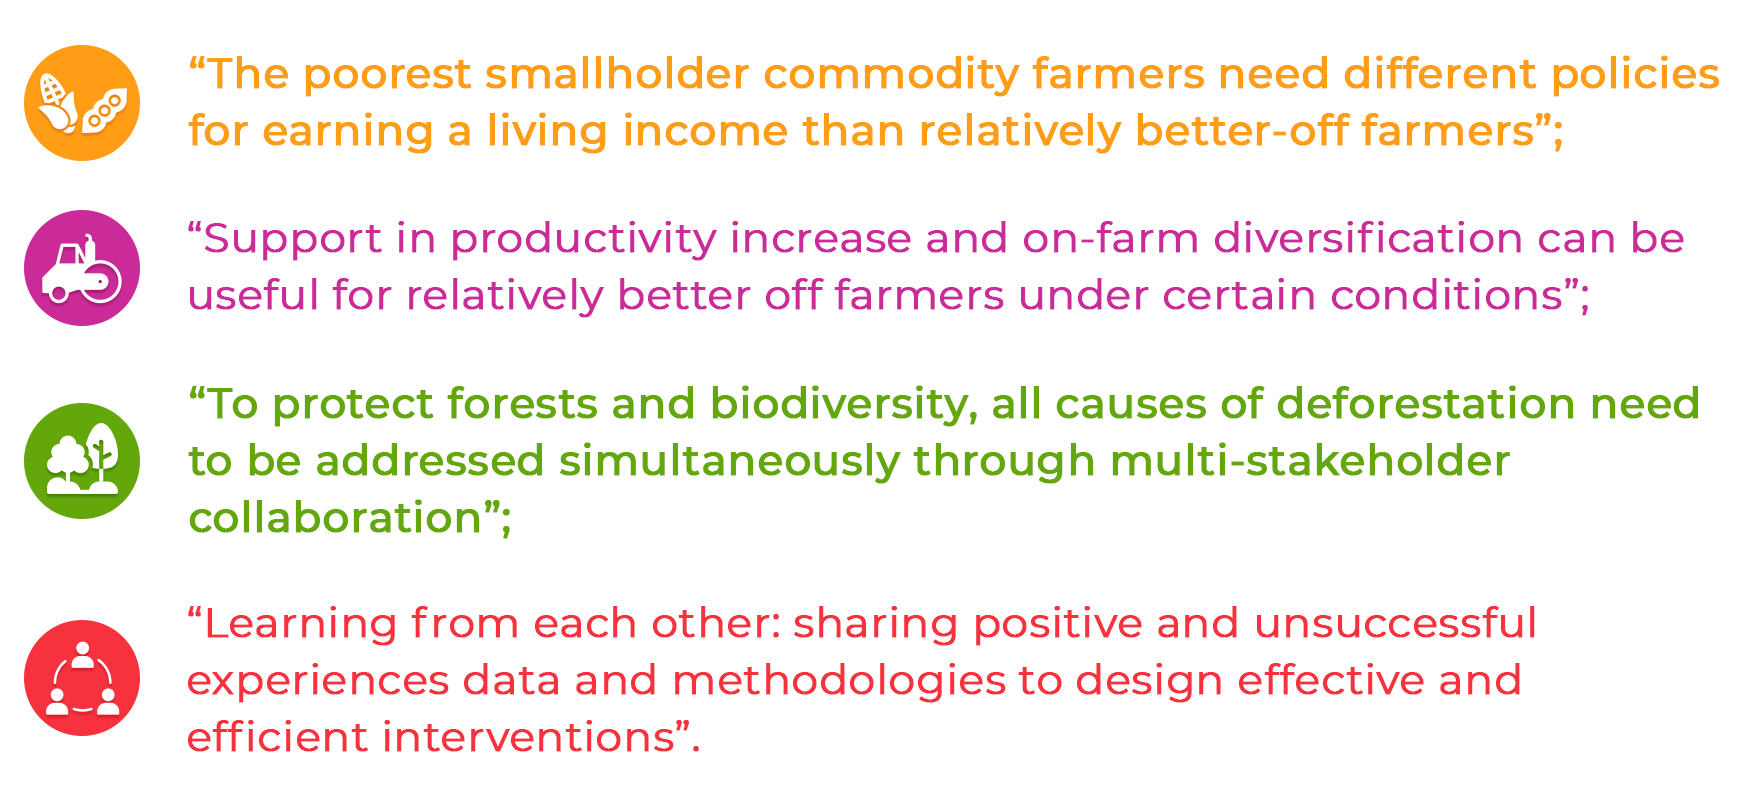 Arte blog - Increasing smallholder farmer income: a pathway to reduce environmental impact and land conversion?